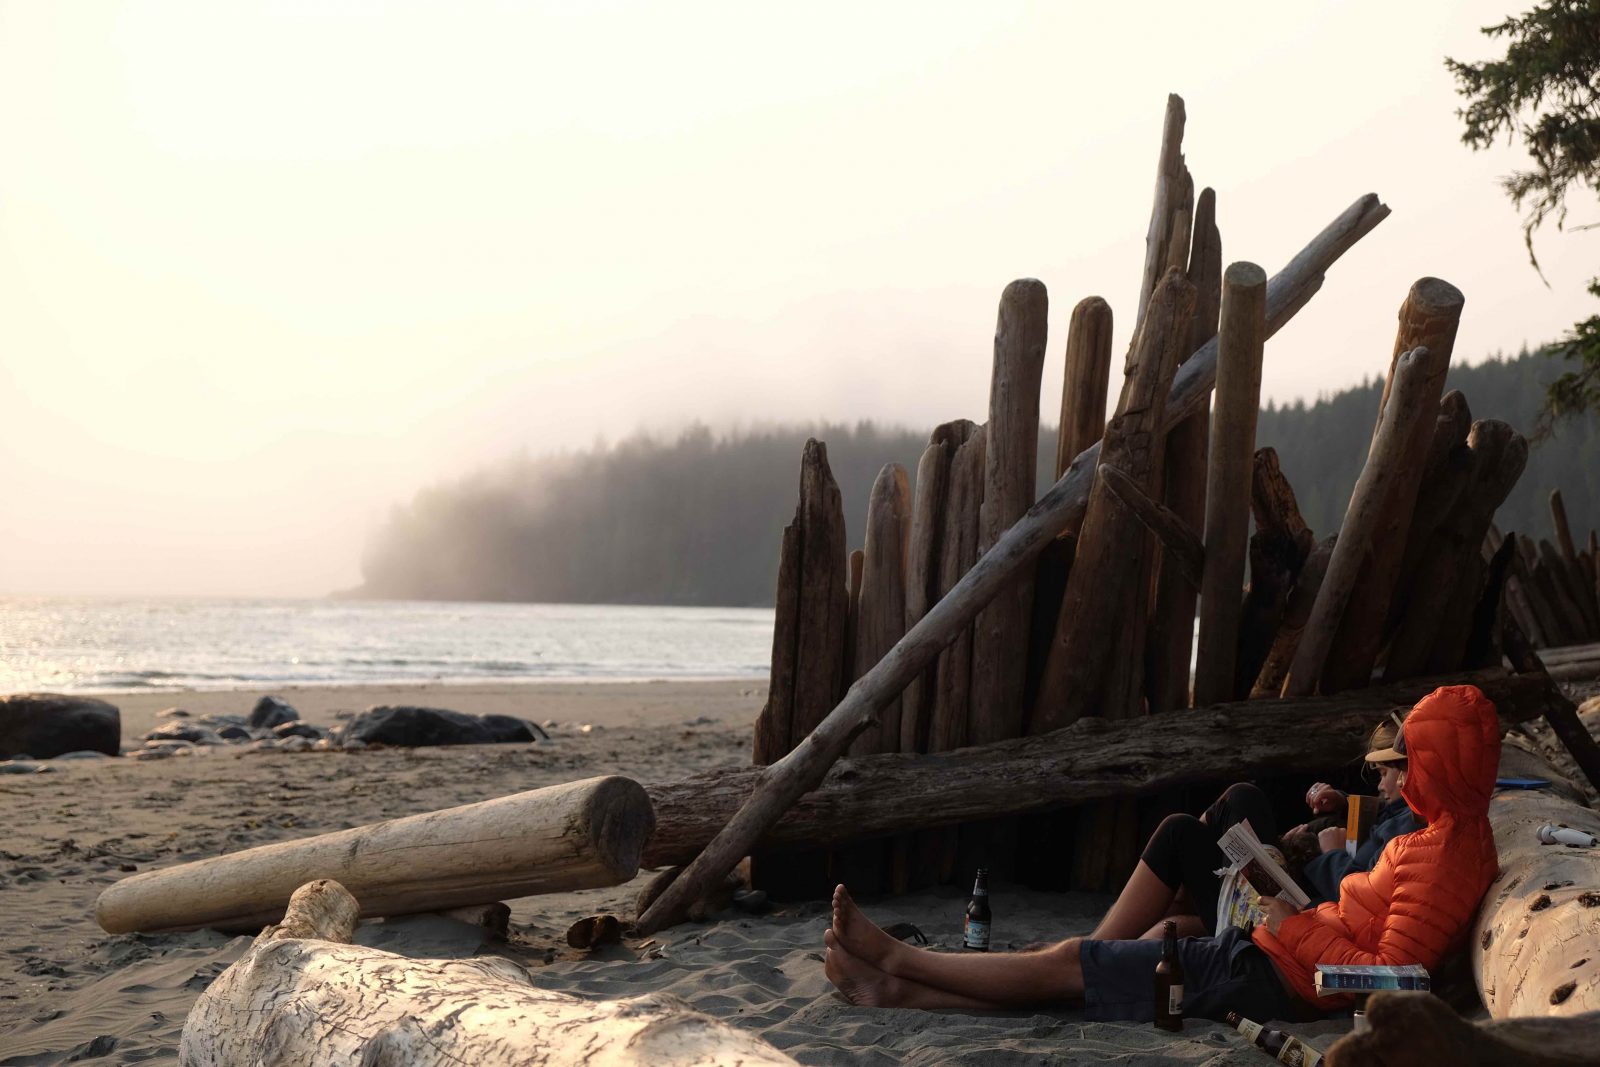 A couple reading on a beach in Vancouver Island, Canada, on a misty morning.